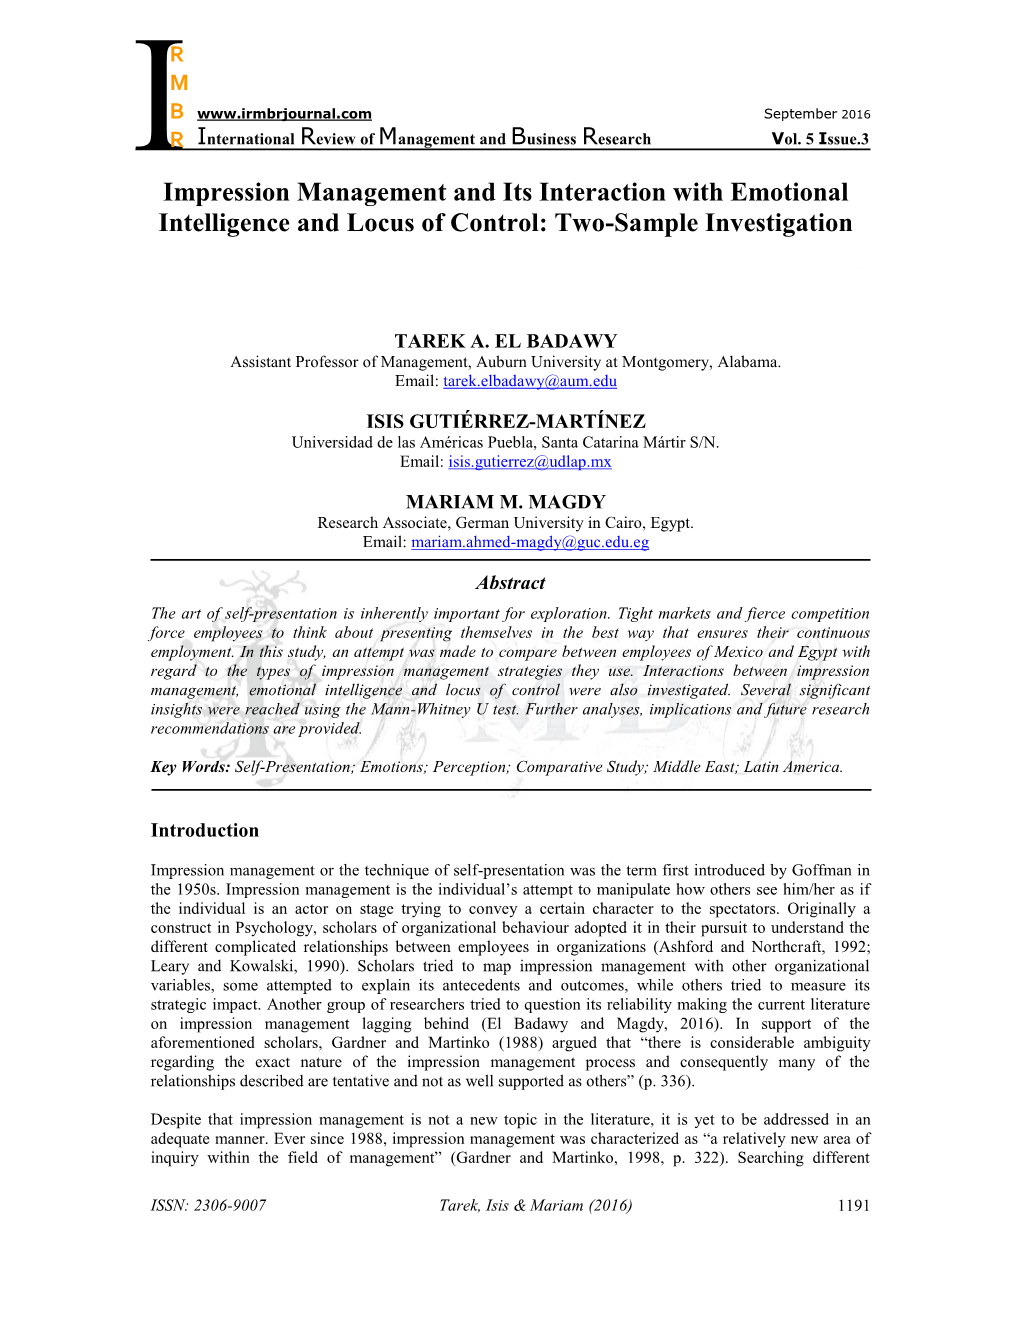 Impression Management and Its Interaction with Emotional Intelligence and Locus of Control: Two-Sample Investigation